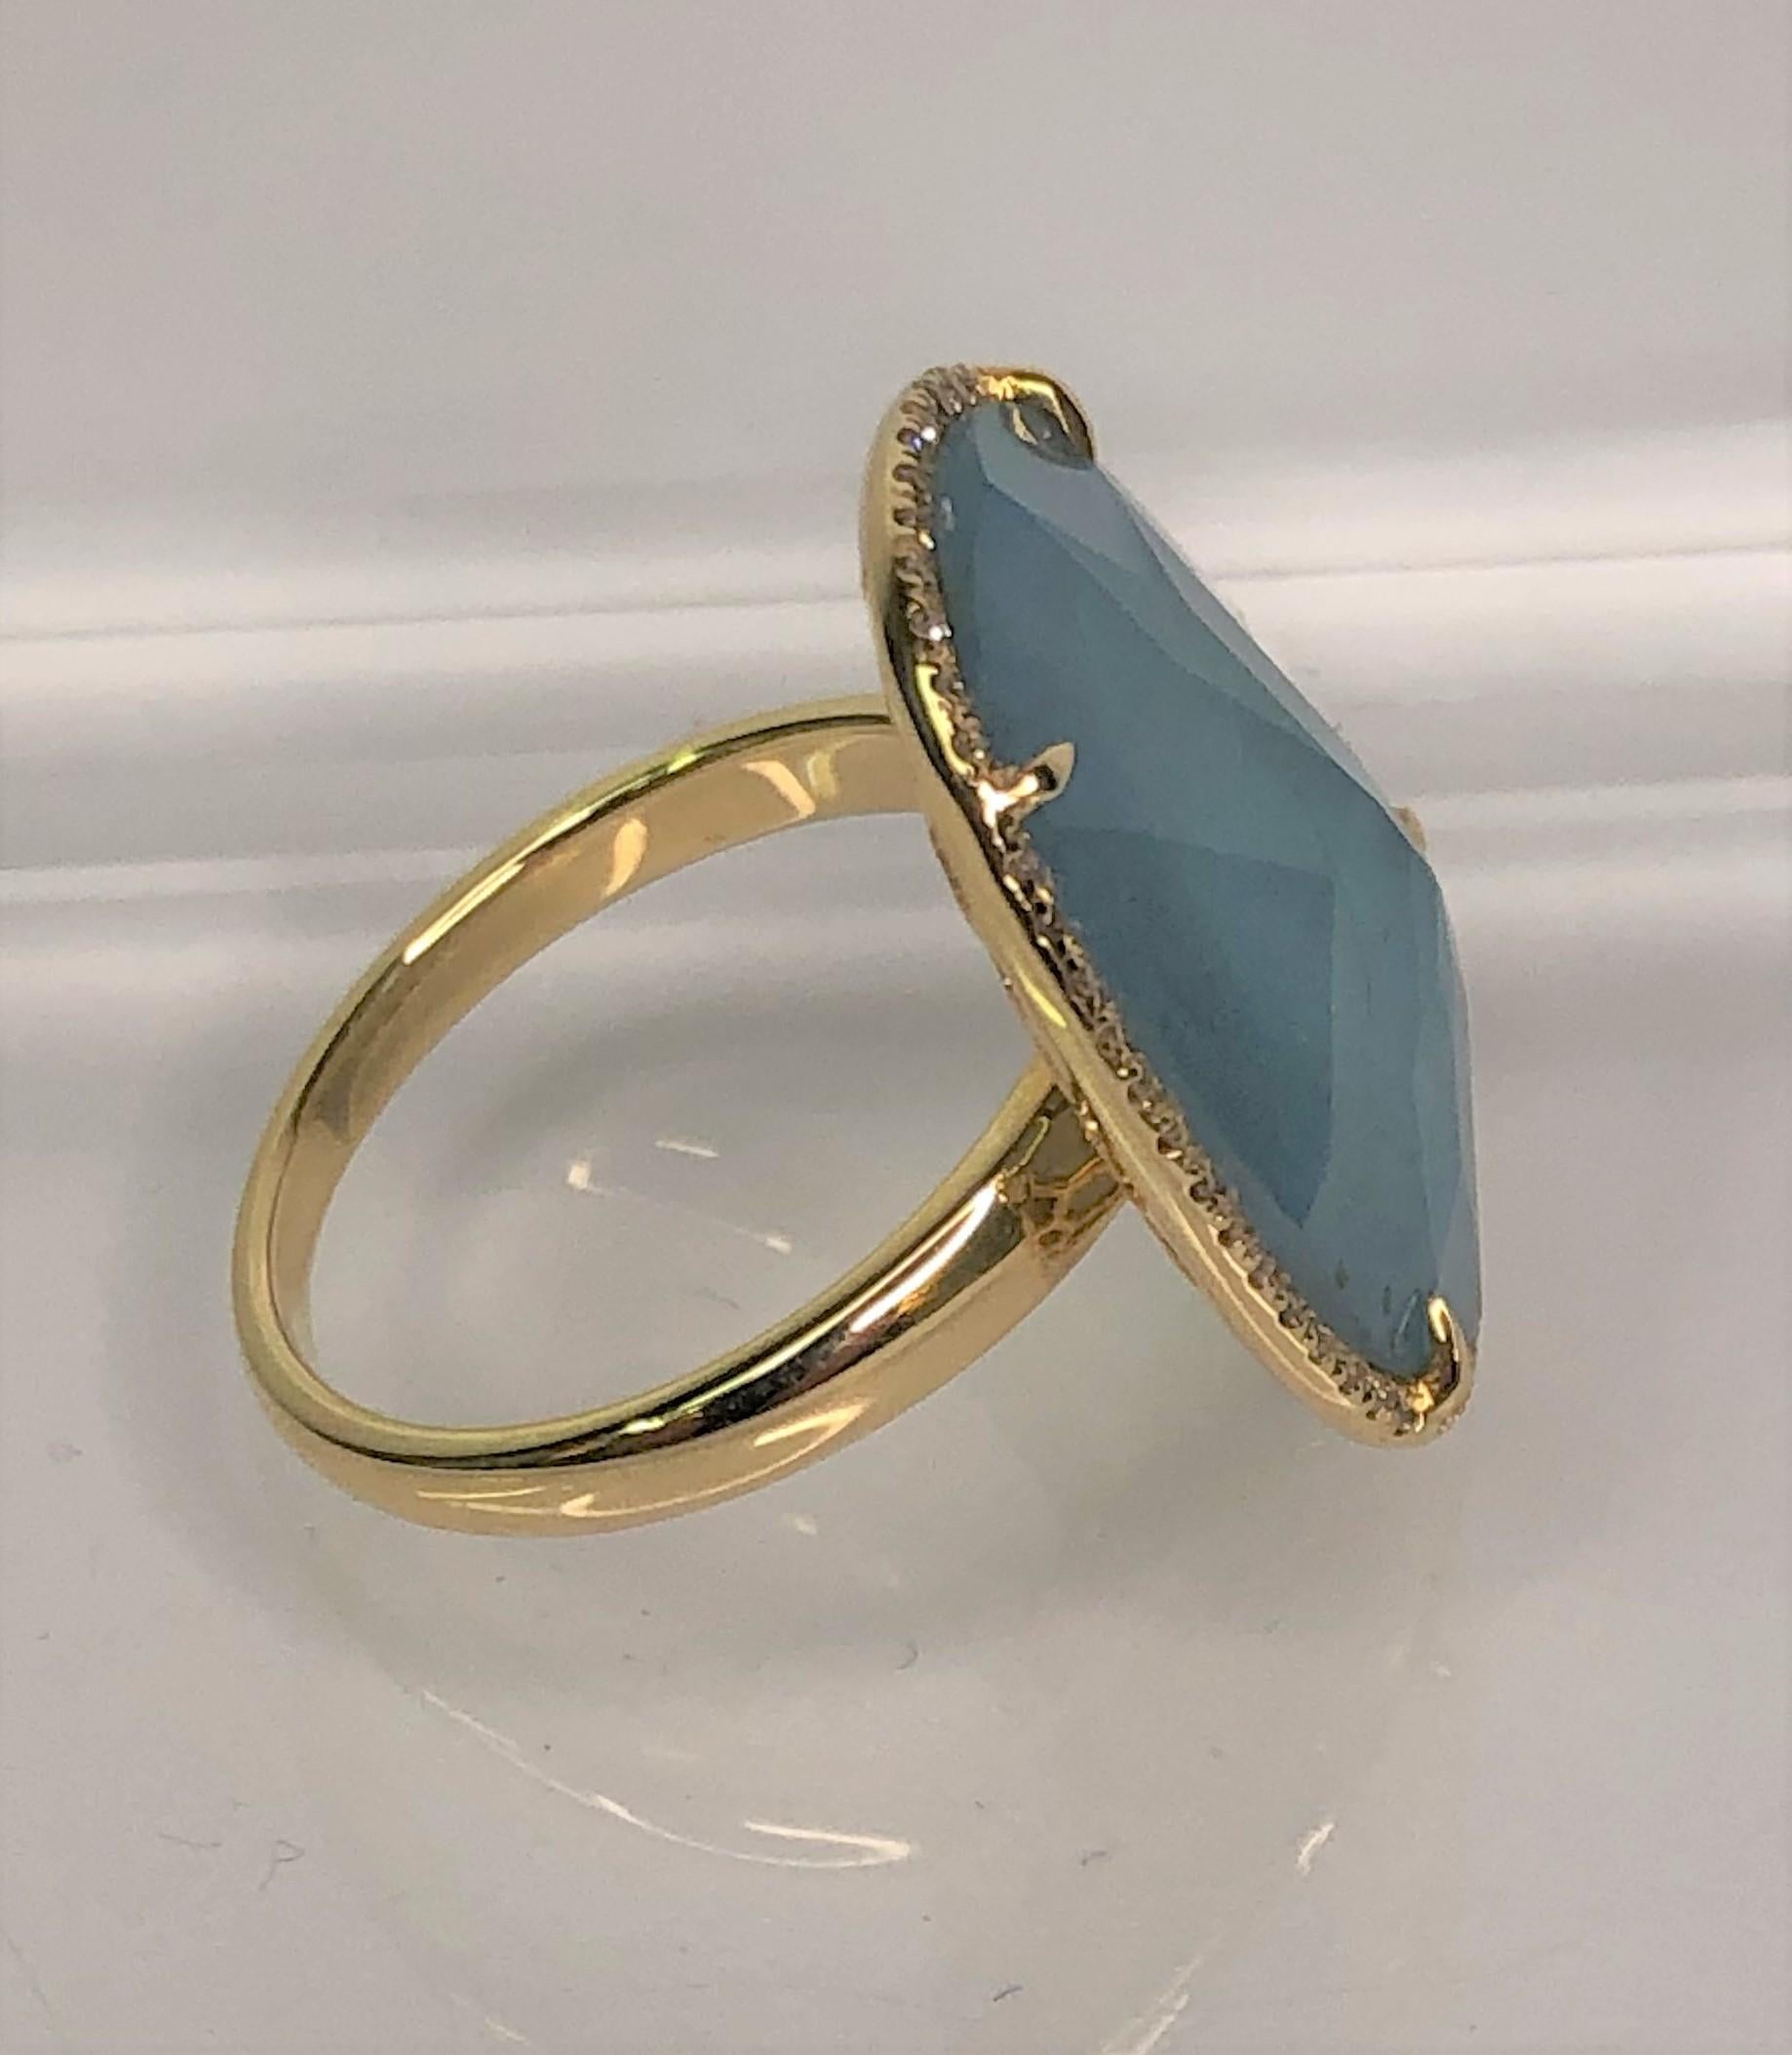 Designer Getana & Co. This ring is a gorgeous light blue apatite slice with a diamond halo.
This ring practically glows.
Oval-ish apatite approximately 20.5mm x 16mm (approximately 8 carats) with beautiful 'honeycomb' back.
Apatite is surrounded by